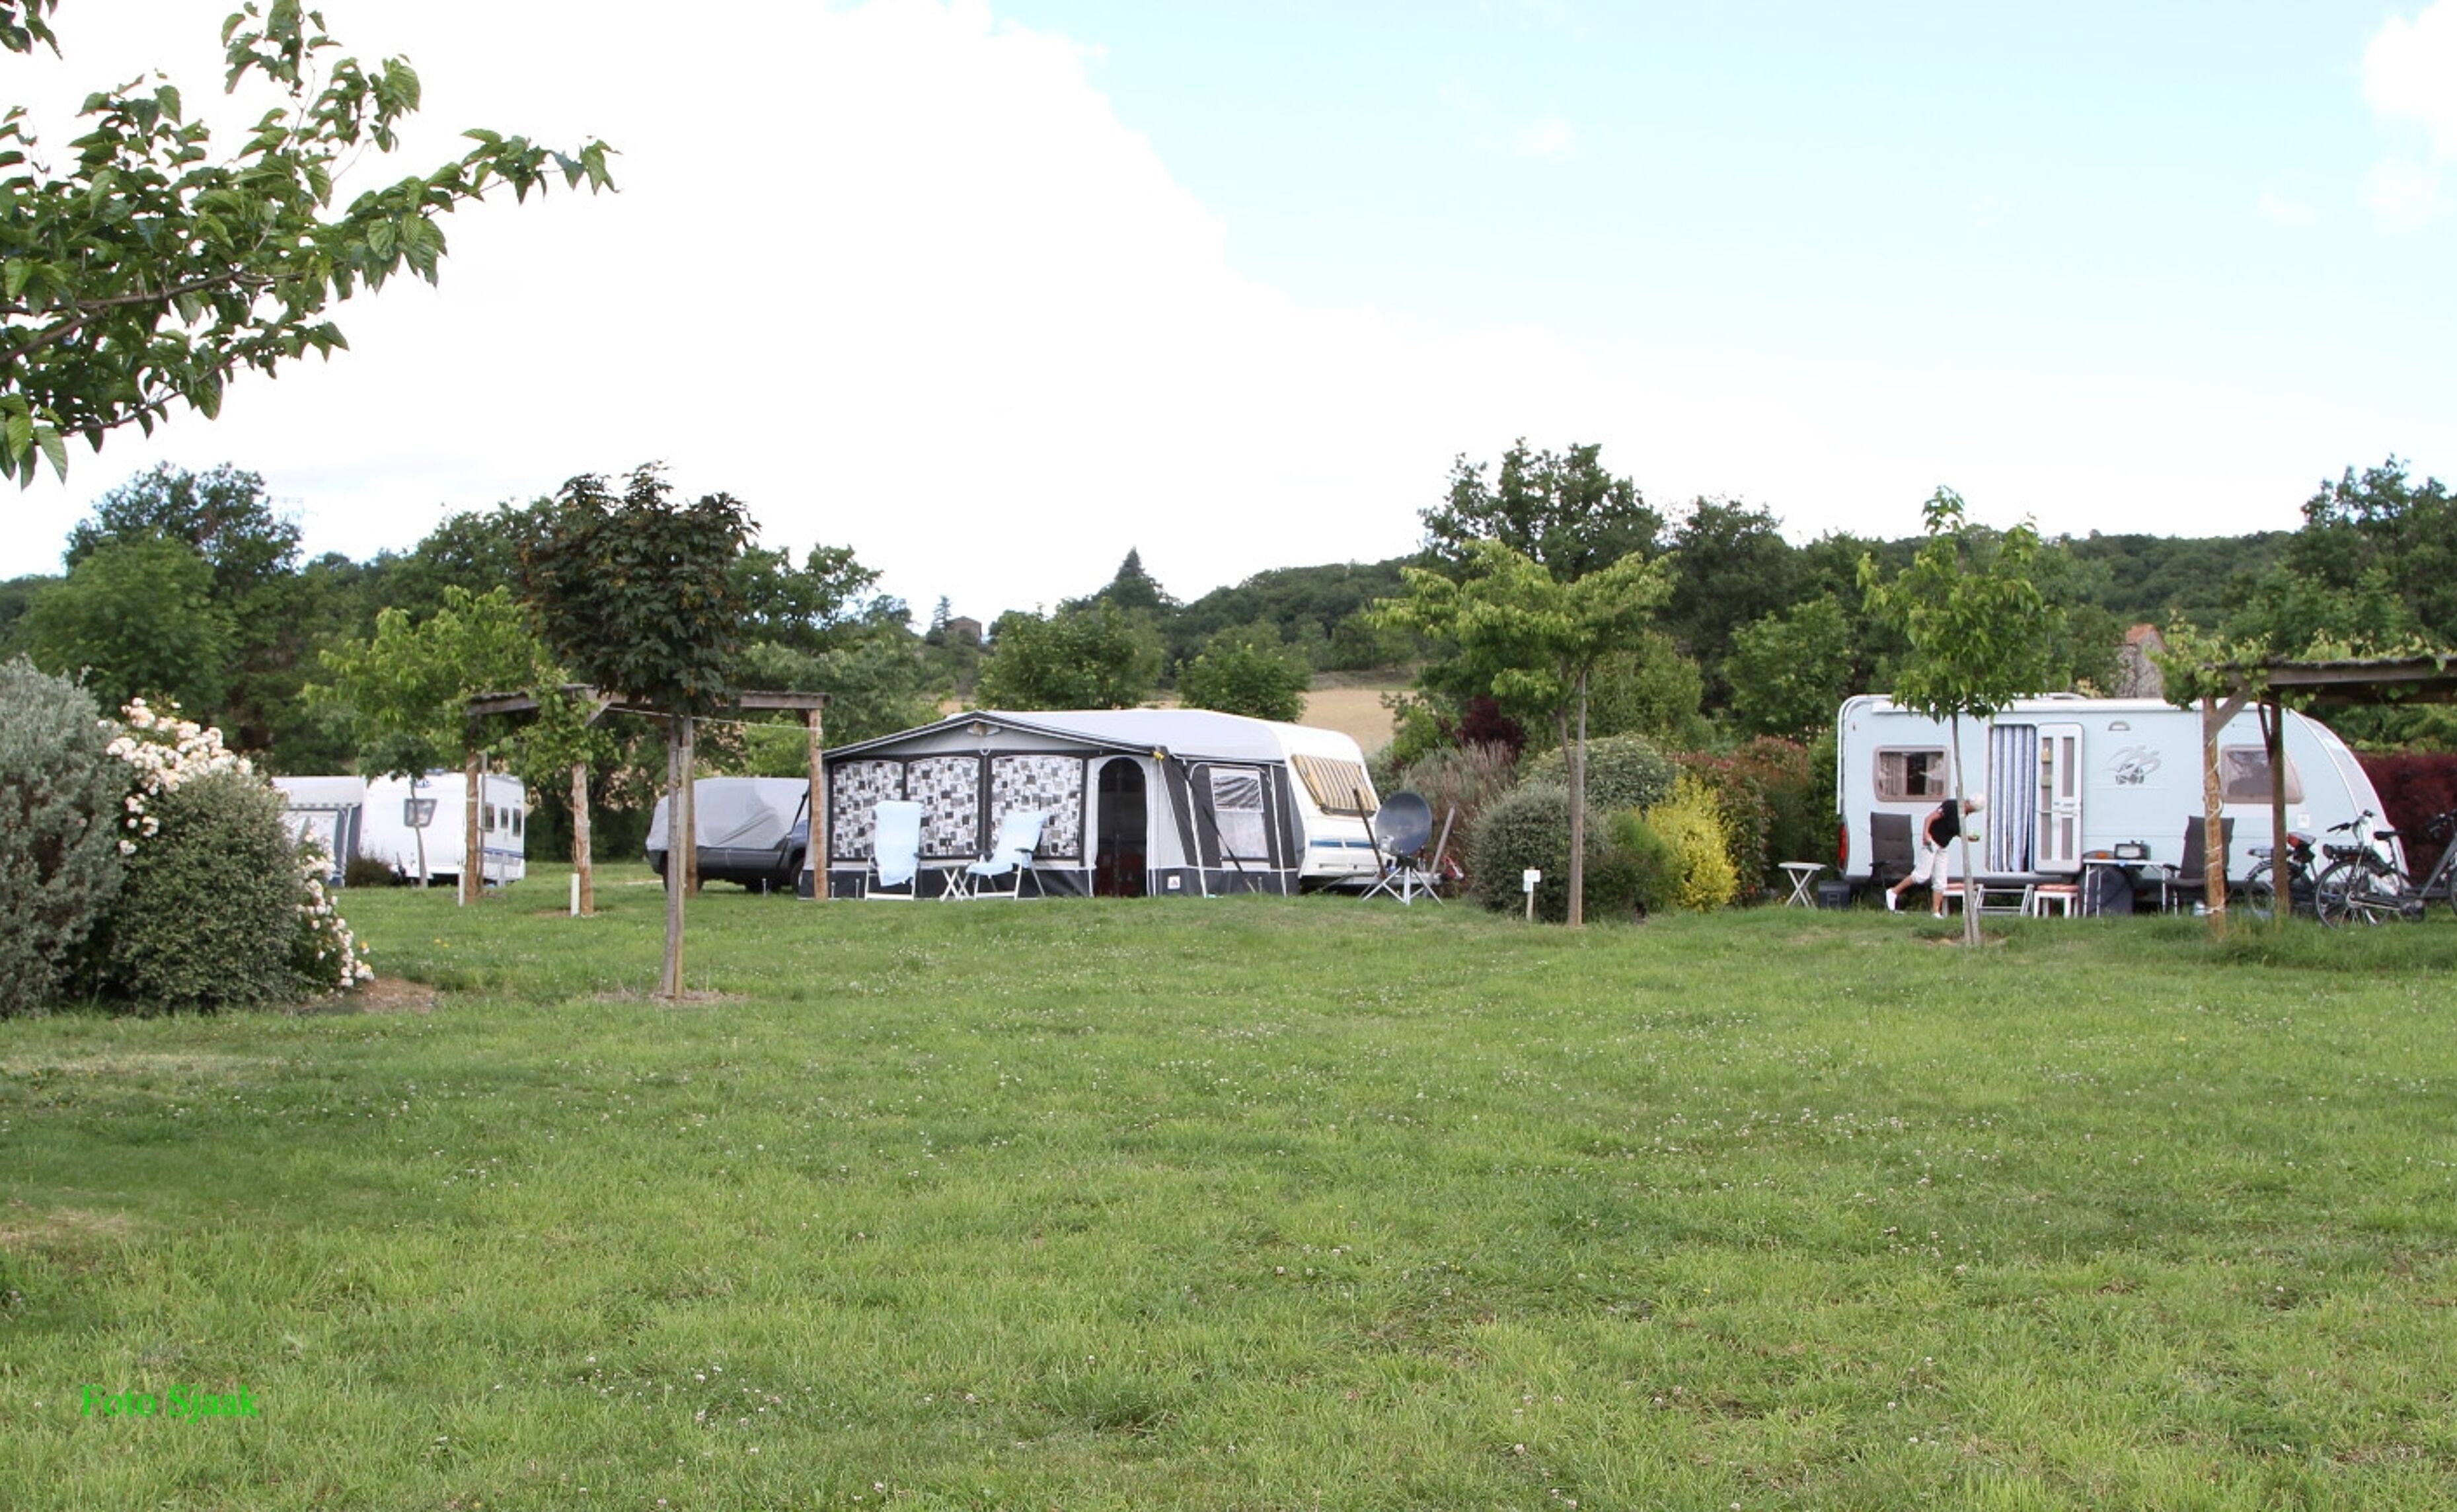 Camping Les Arches